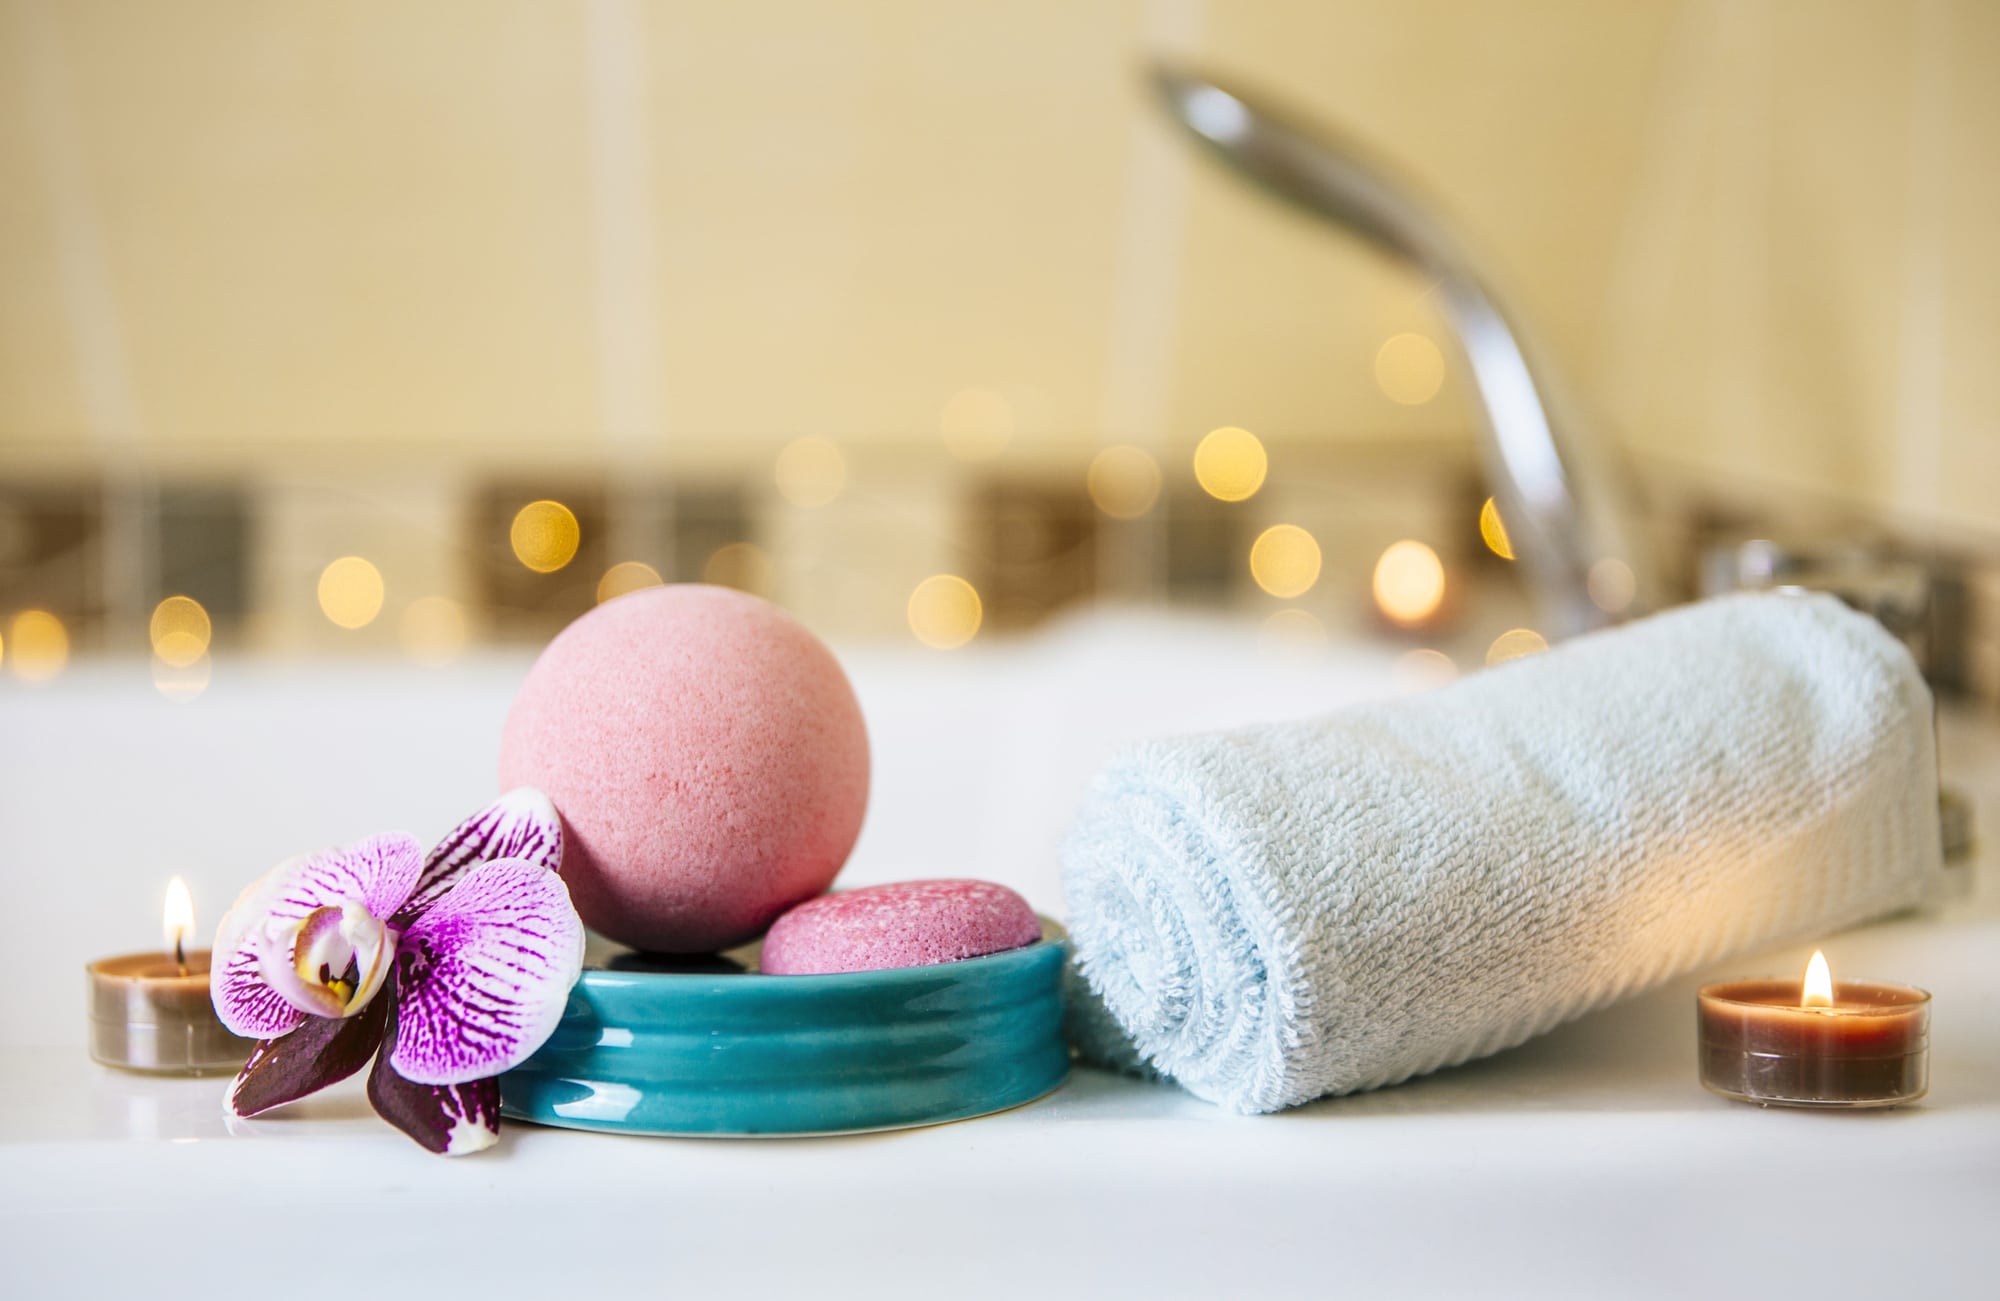 How To Use Bath Bombs Without Bathtub